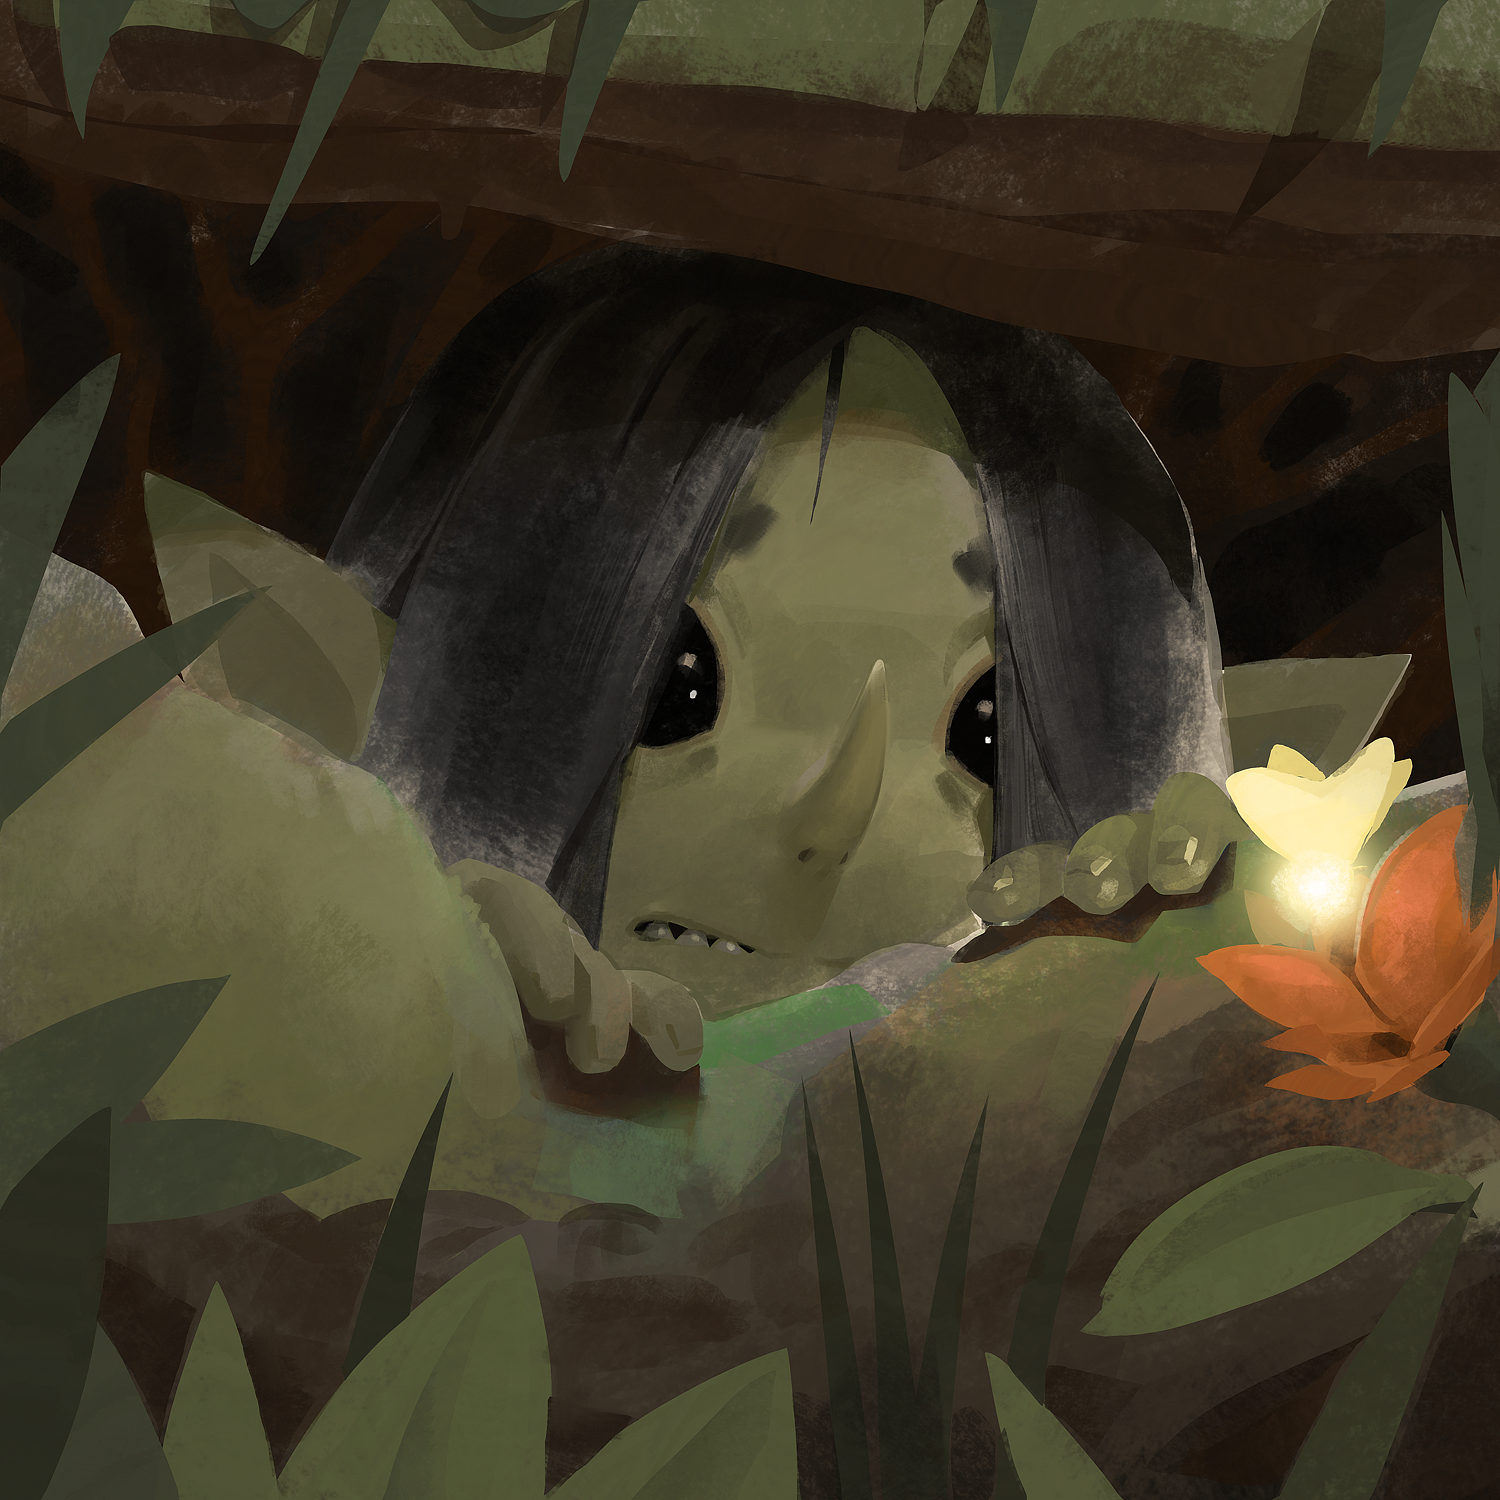 a small girl goblin child hiding behind some brush, looking at a fairy